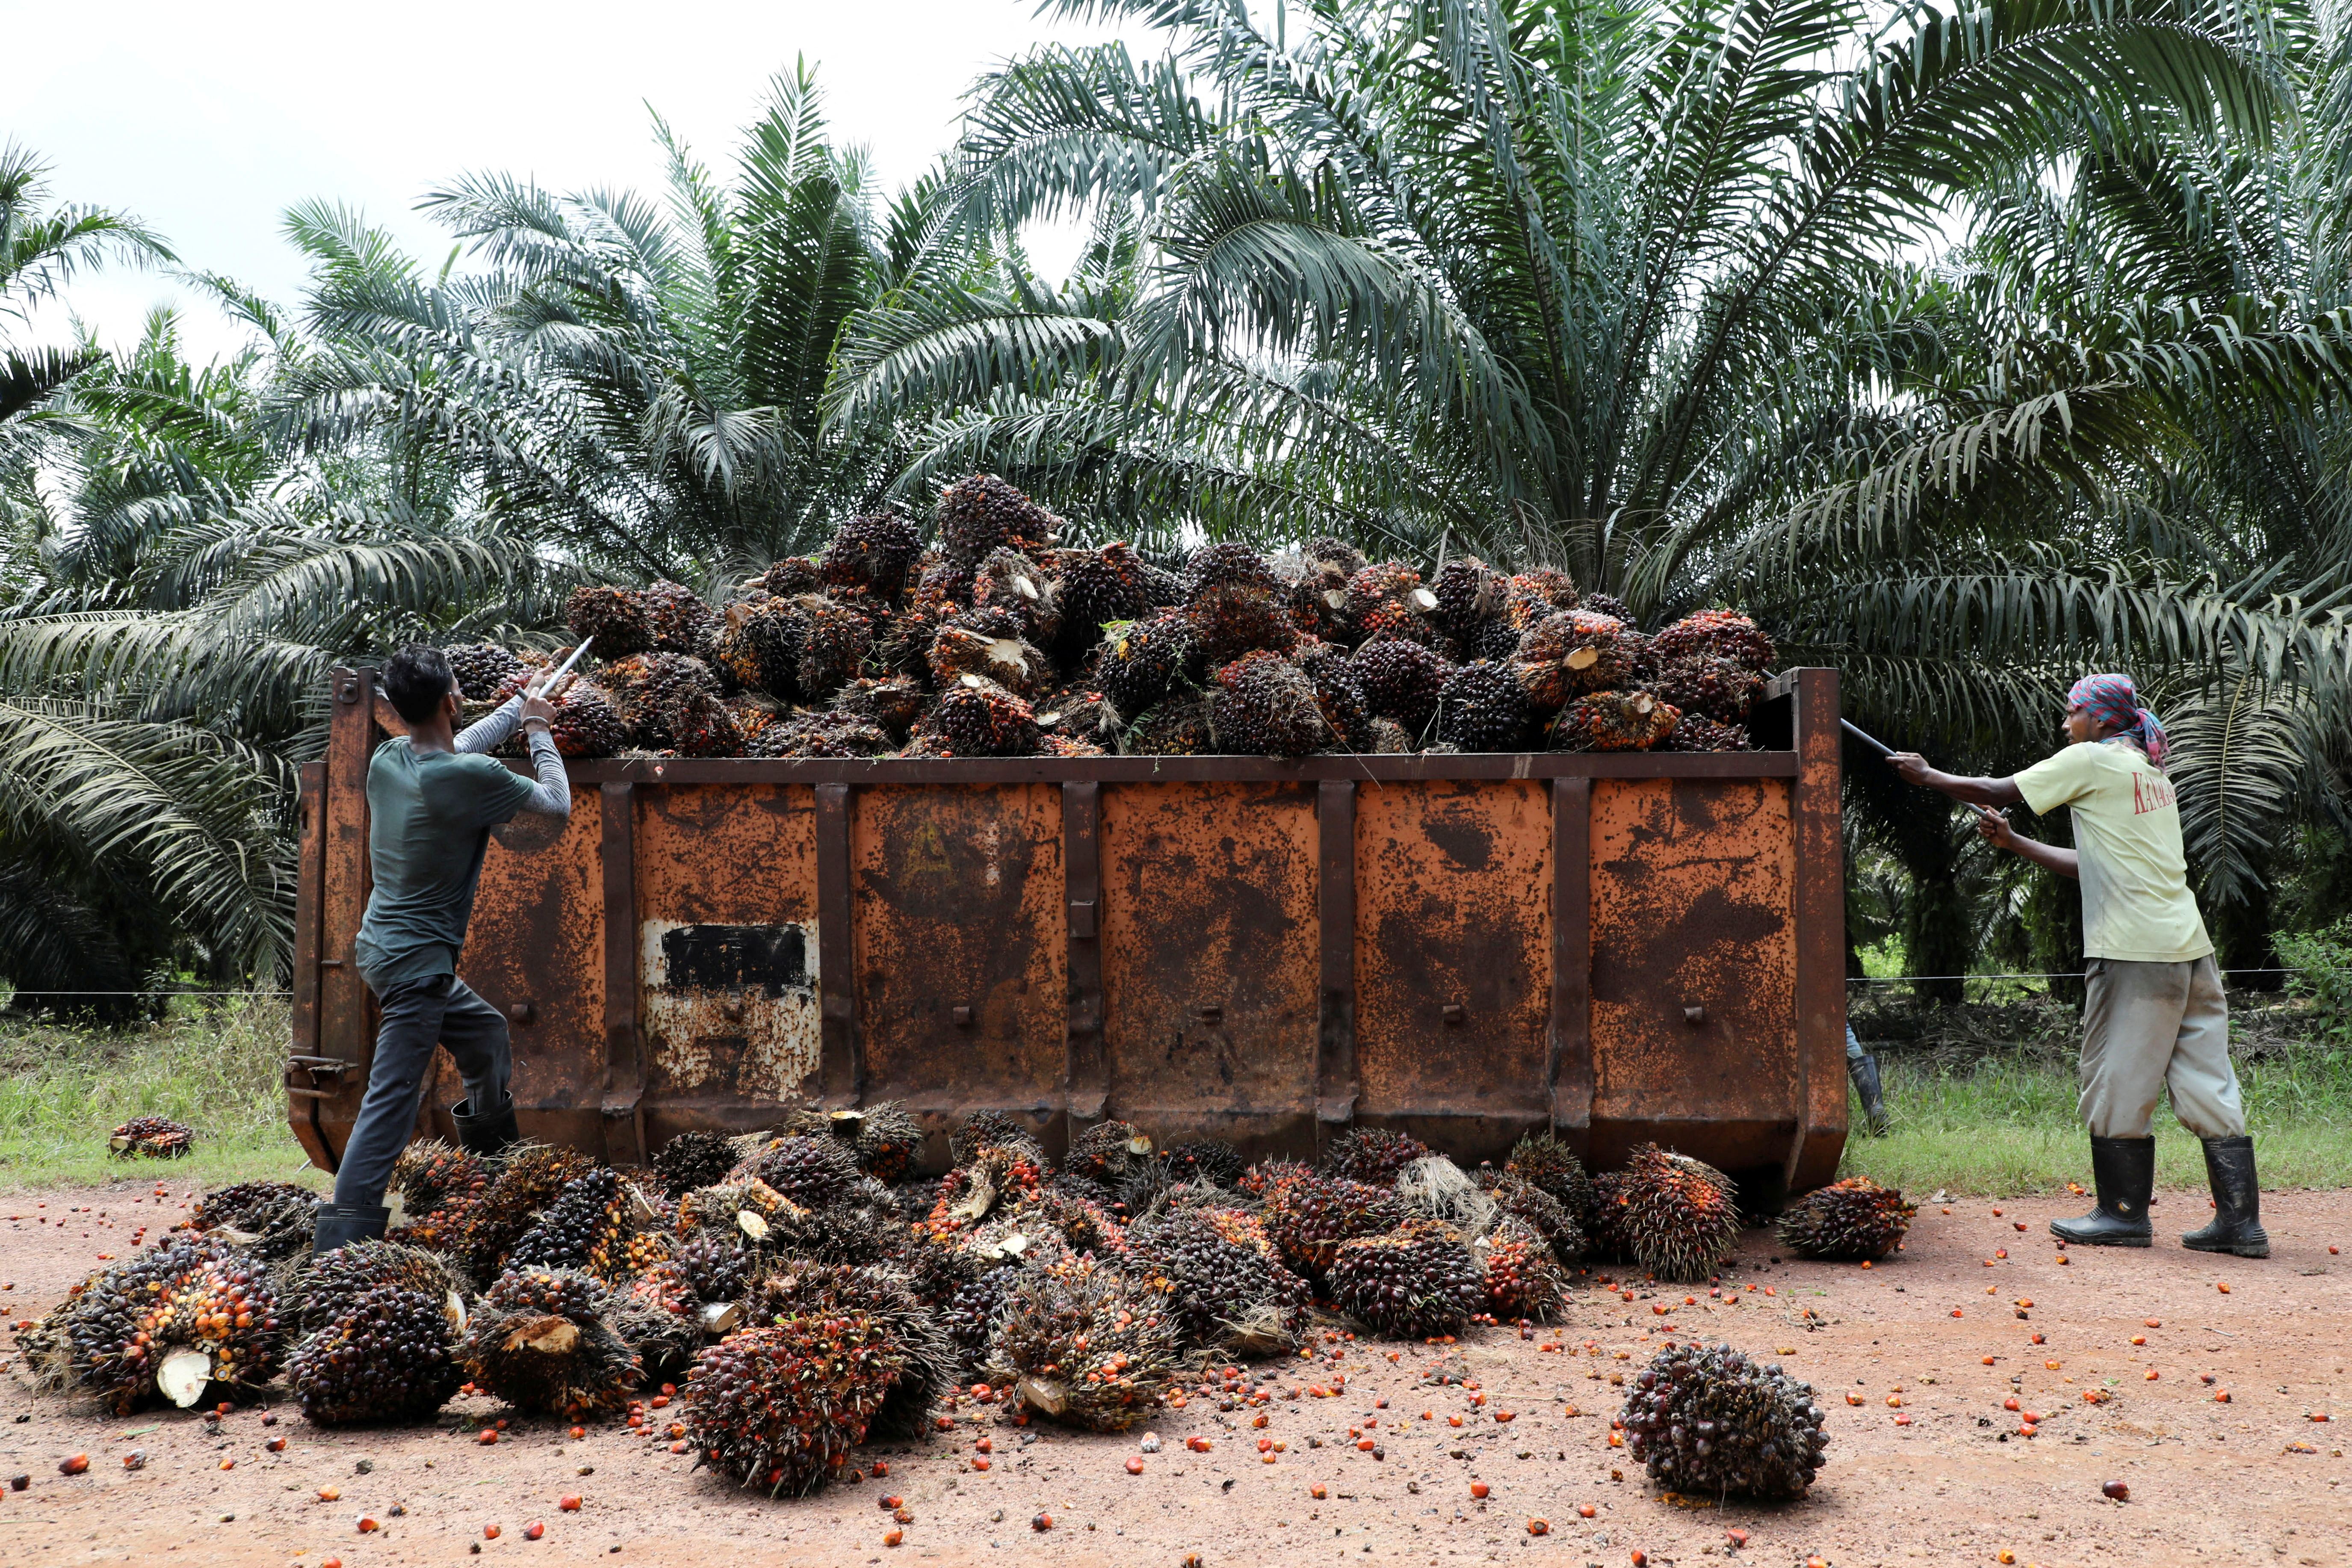 Workers load palm oil fruit bunches at a plantation in Slim River